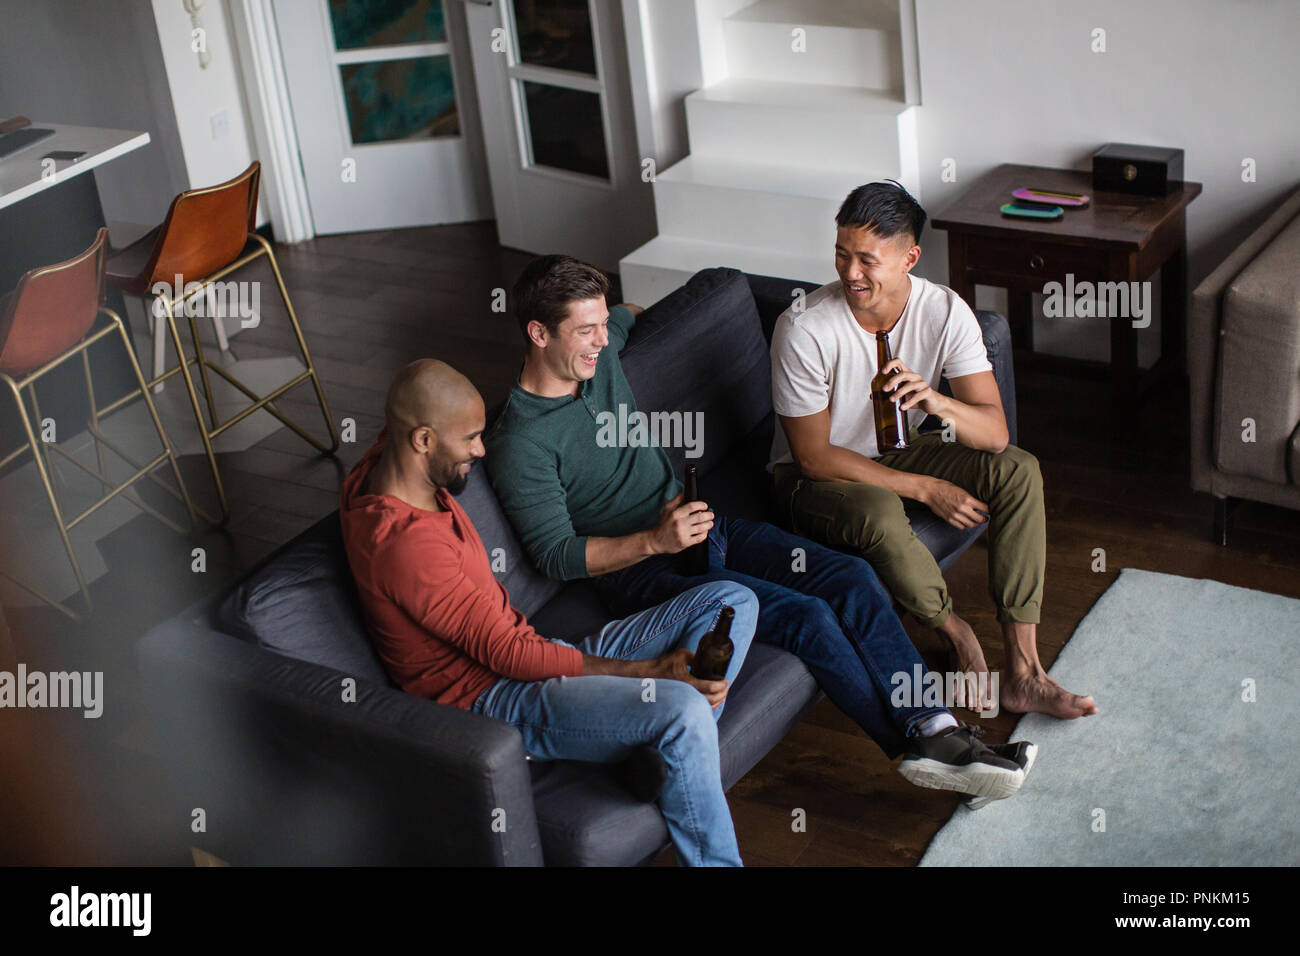 Male friends having a beer together in an apartment Stock Photo